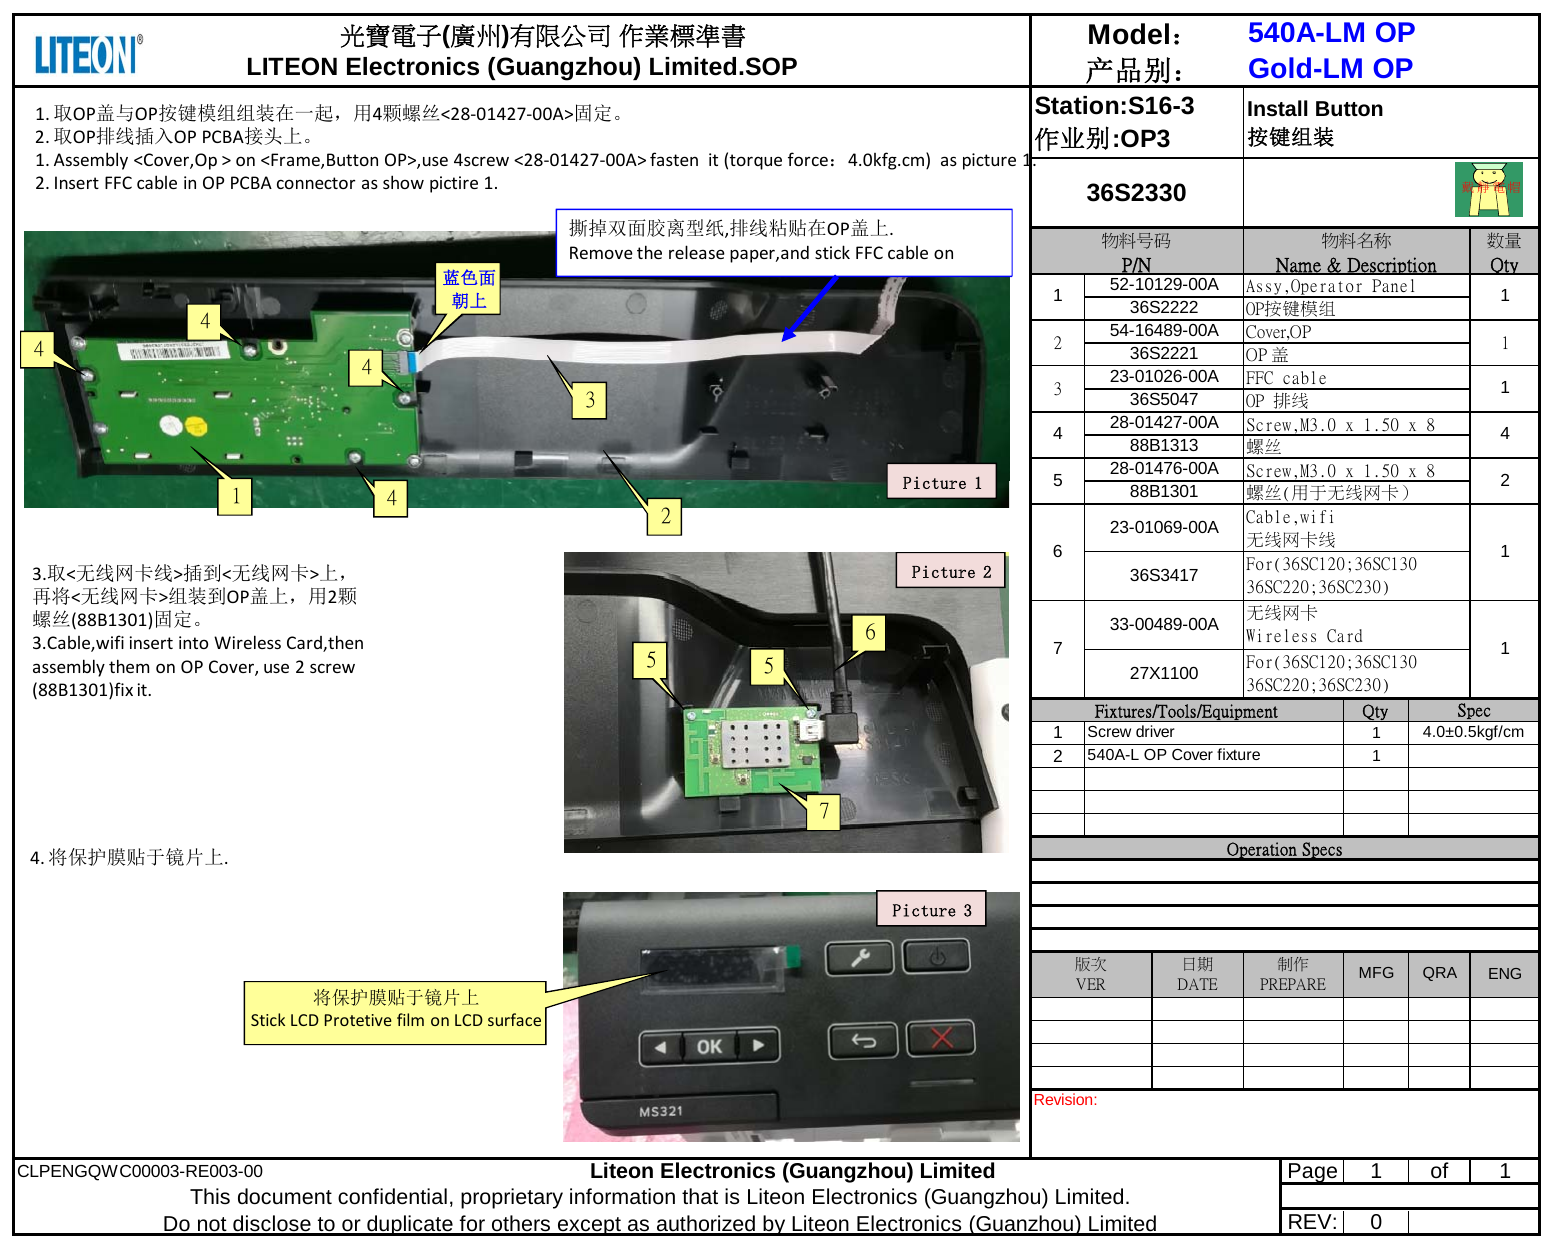 Qty1121CLPENGQWC00003-RE003-00Liteon Electronics (Guangzhou) Limited Page1 of 1REV: 0733-00489-00A 无线网卡Wireless Card 127X1100 For(36SC120;36SC13036SC220;36SC230)Cable,wifi无线网卡线For(36SC120;36SC13036SC220;36SC230)1636S341723-01069-00ARevision: This document confidential, proprietary information that is Liteon Electronics (Guangzhou) Limited.                         Do not disclose to or duplicate for others except as authorized by Liteon Electronics (Guanzhou) LimitedENG版次VER日期DATE制作PREPARE MFG QRAOperation SpecsFixtures/Tools/Equipment SpecScrew driver 4.0±0.5kgf/cm540A-L OP Cover fixture528-01476-00A Screw,M3.0 x 1.50 x 8 288B1301 螺丝(用于无线网卡）428-01427-00A Screw,M3.0 x 1.50 x 8 488B1313 螺丝152-10129-00A Assy,Operator Panel 136S2222 OP按键模组323-01026-00A FFC cable 136S5047 OP 排线254-16489-00A Cover,OP 136S2221 OP 盖      光寶電子(廣州)有限公司 作業標準書LITEON Electronics (Guangzhou) Limited.SOPModel：产品别：540A-LM OPGold-LM OPStation:S16-3作业别:OP3Install Button按键组装物料号码P/N物料名称Name &amp; Description数量Qty36S2330戴靜電帽1.取OP盖与OP按键模组组装在一起，用4颗螺丝&lt;28‐01427‐00A&gt;固定。2.取OP排线插入OPPCBA接头上。1.Assembly&lt;Cover,Op&gt;on&lt;Frame,ButtonOP&gt;,use4screw&lt;28‐01427‐00A&gt;fastenit(torqueforce：4.0kfg.cm)aspicture1.2.InsertFFCcableinOPPCBAconnectorasshowpictire1.24441Picture 13蓝色面朝上564.将保护膜贴于镜片上.Picture 3将保护膜贴于镜片上StickLCDProtetivefilmonLCDsurface撕掉双面胶离型纸,排线粘贴在OP盖上.Removethereleasepaper,andstickFFCcableon573.取&lt;无线网卡线&gt;插到&lt;无线网卡&gt;上，再将&lt;无线网卡&gt;组装到OP盖上，用2颗螺丝(88B1301)固定。3.Cable,wifiinsertintoWirelessCard,thenassemblythemonOPCover,use2screw(88B1301)fixit.4Picture 2